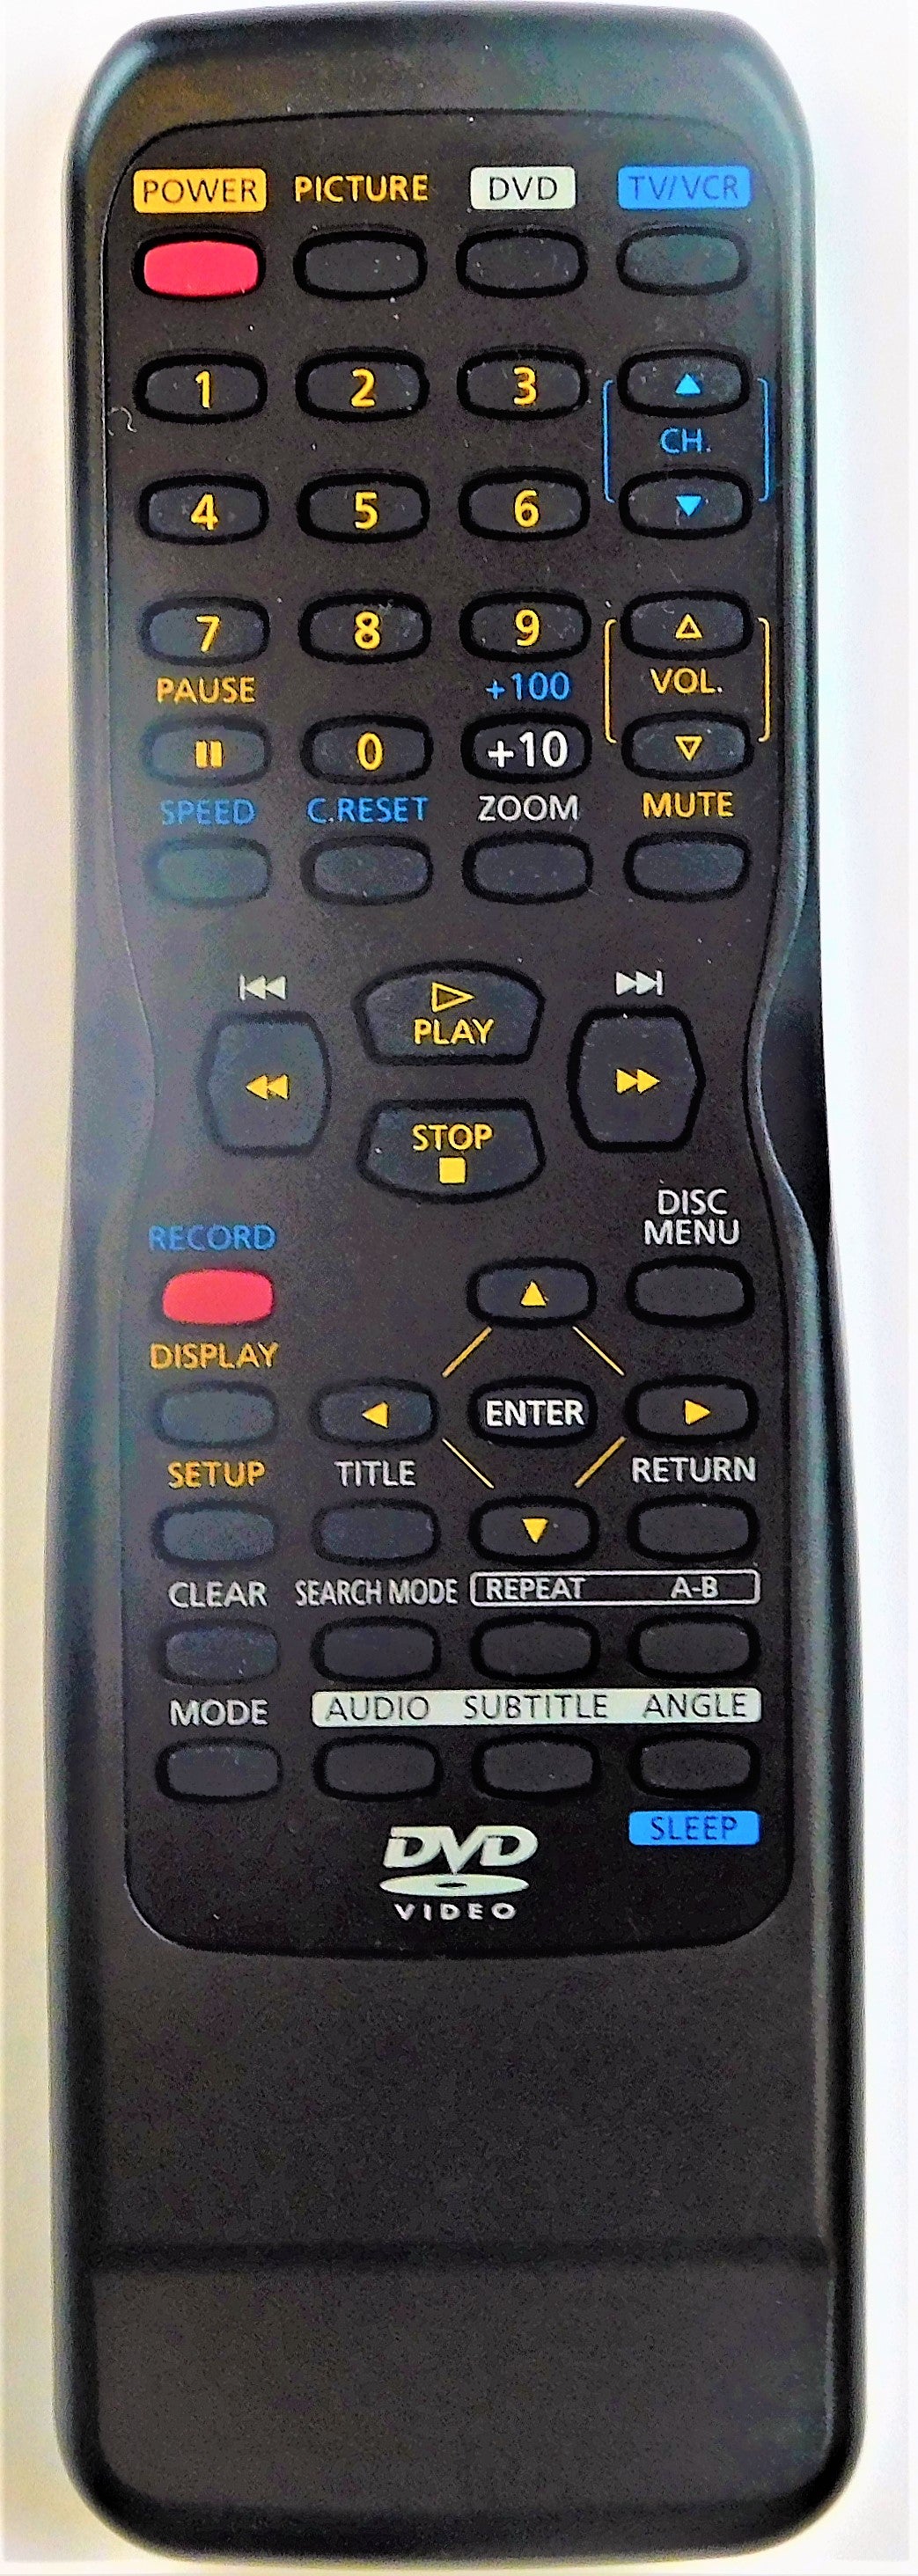 OEM replacement remote control for Sylvania CRT TV VCR & DVD COMBOs N0288UD